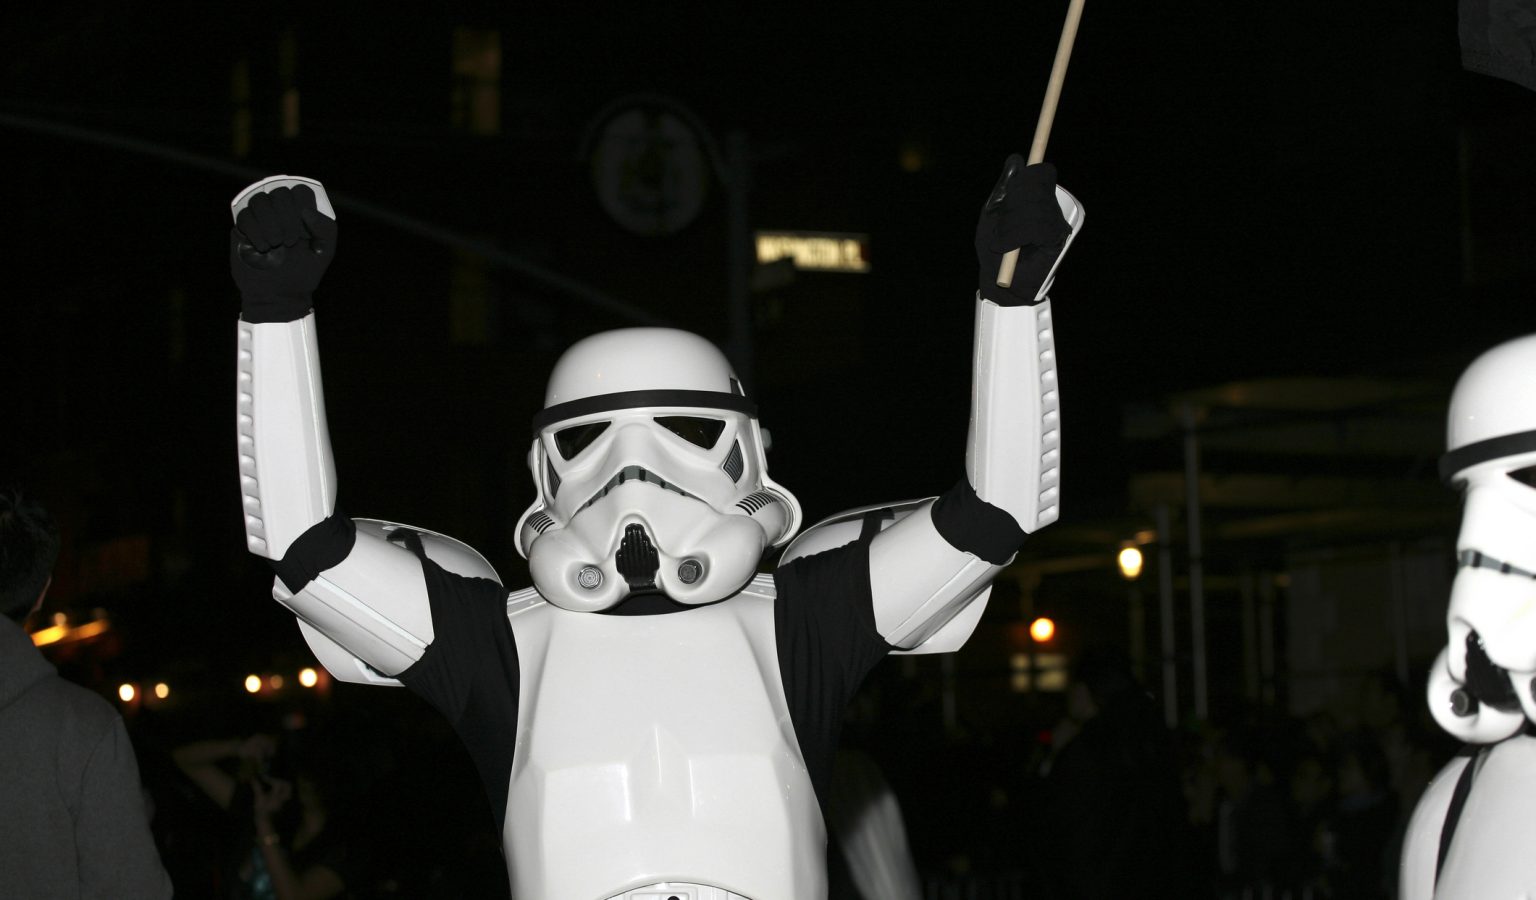 Imperial storm trooper at the annual Halloween Parade in Greenwich Village New York. Photographed October, 31st, 2008 in the USA.